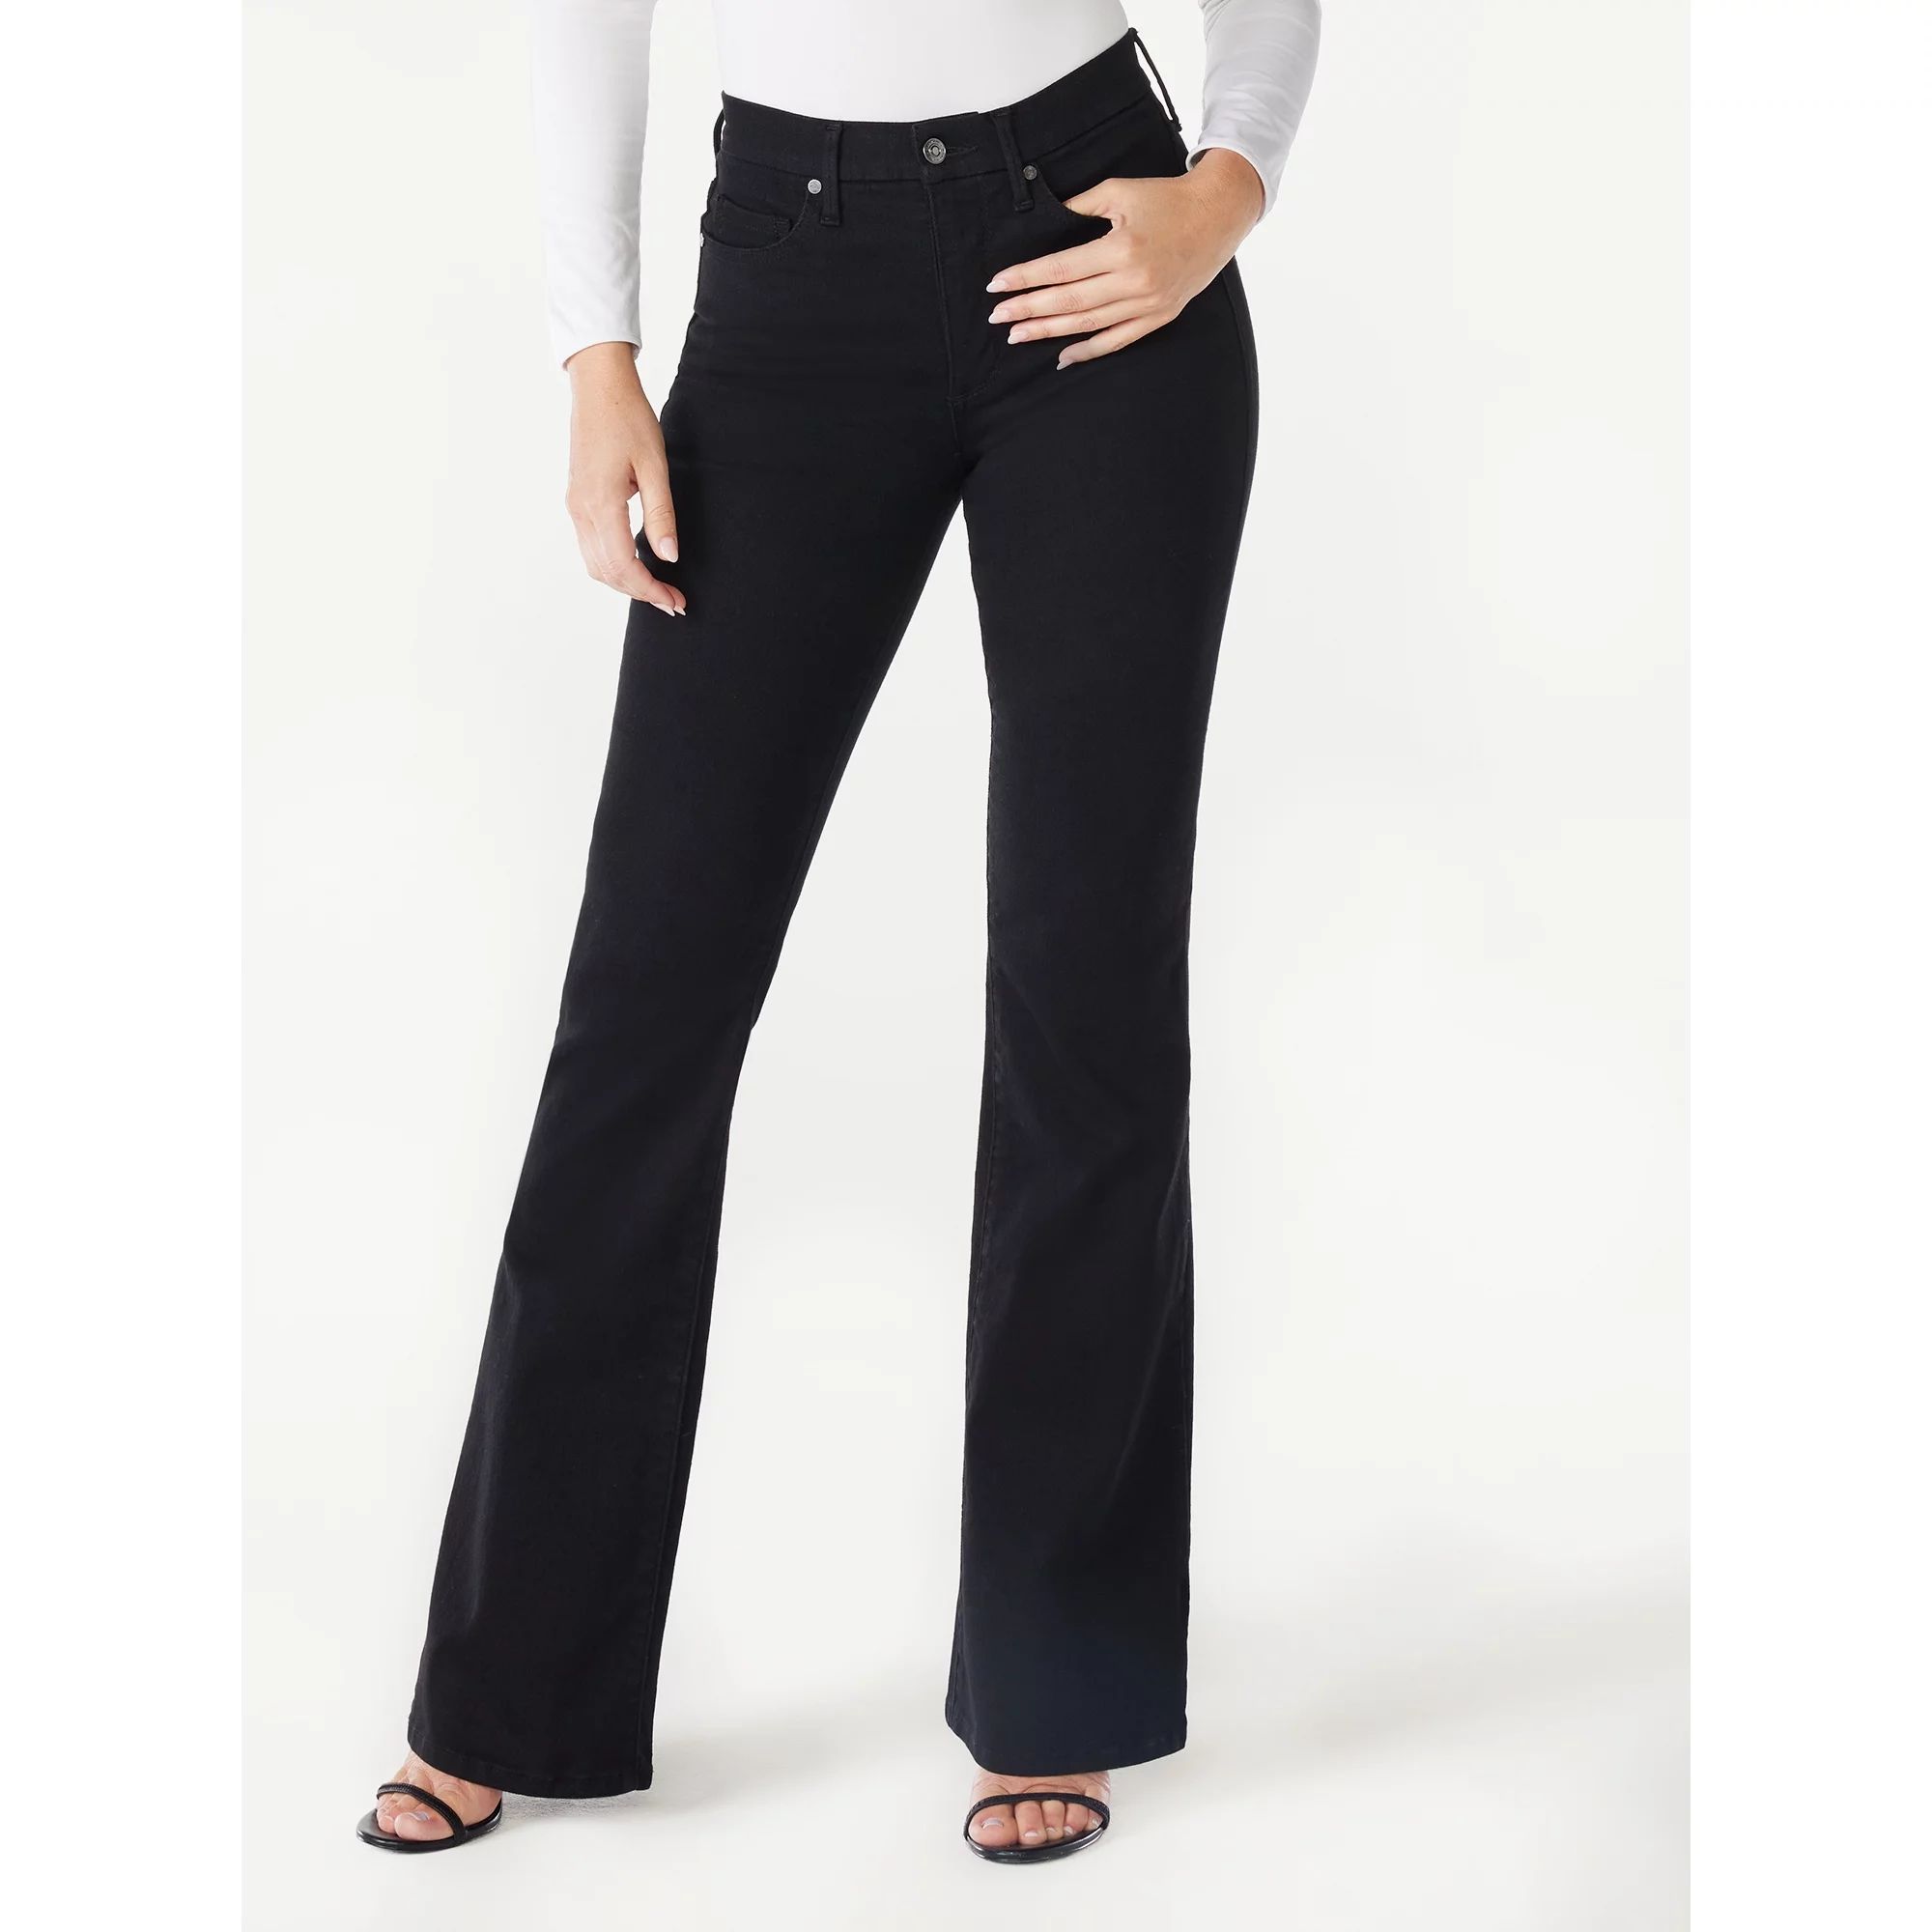 Sofia Jeans Women’s Melisa Flare High Rise Forever You 1 Size Fits 3 Jeans, 33.5” inseam | Walmart (US)